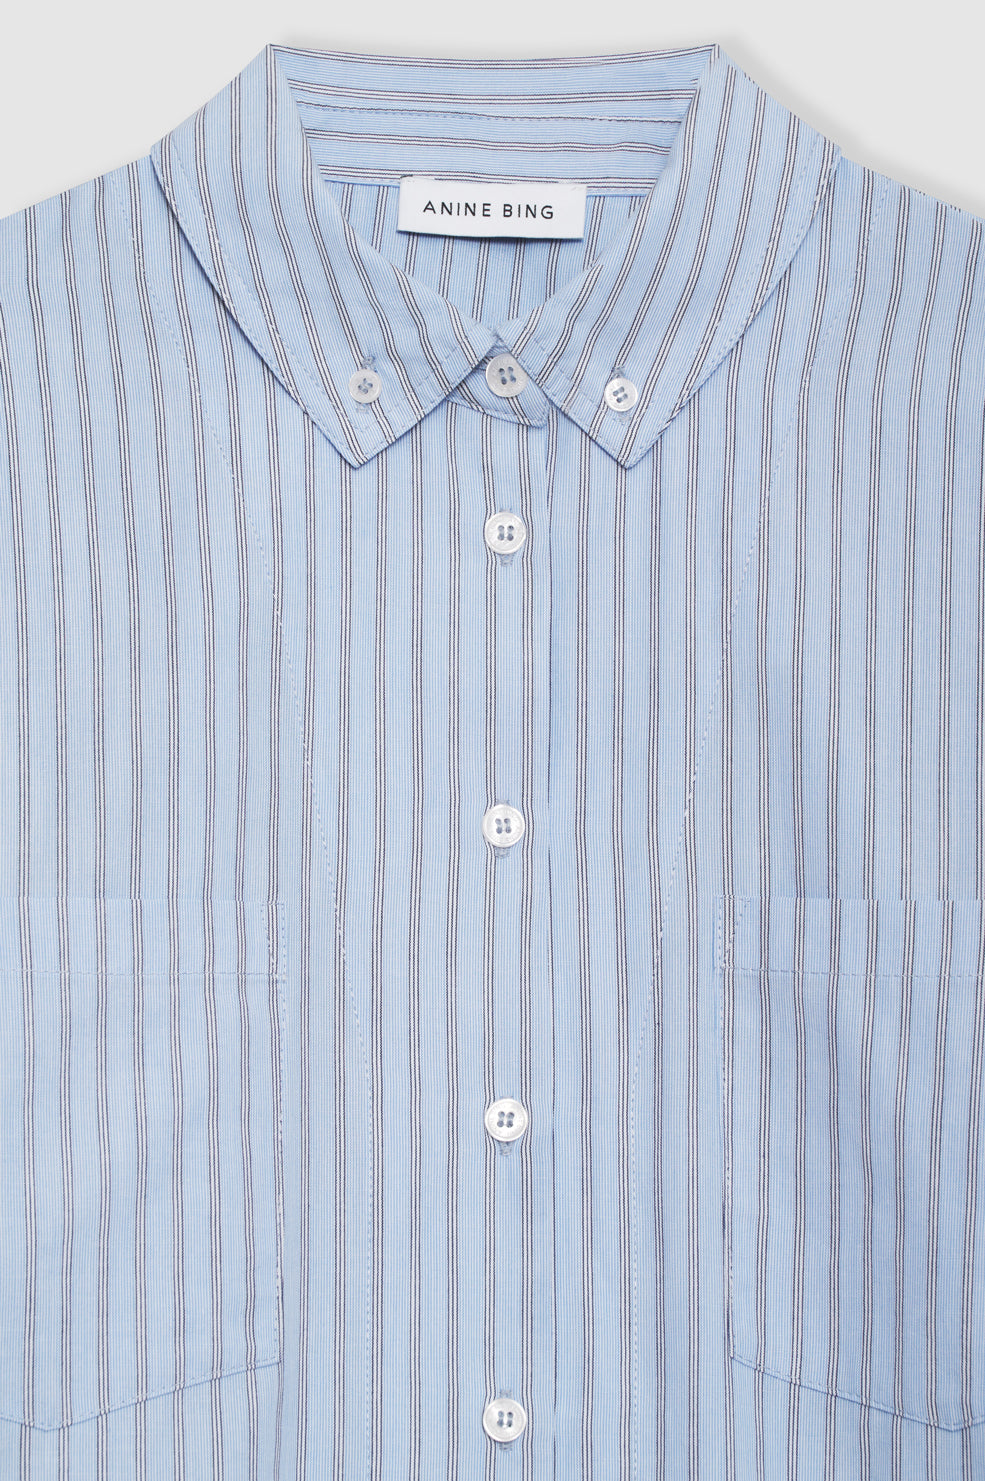 ANINE BING Catherine Shirt - Blue And White Stripe - Detail View